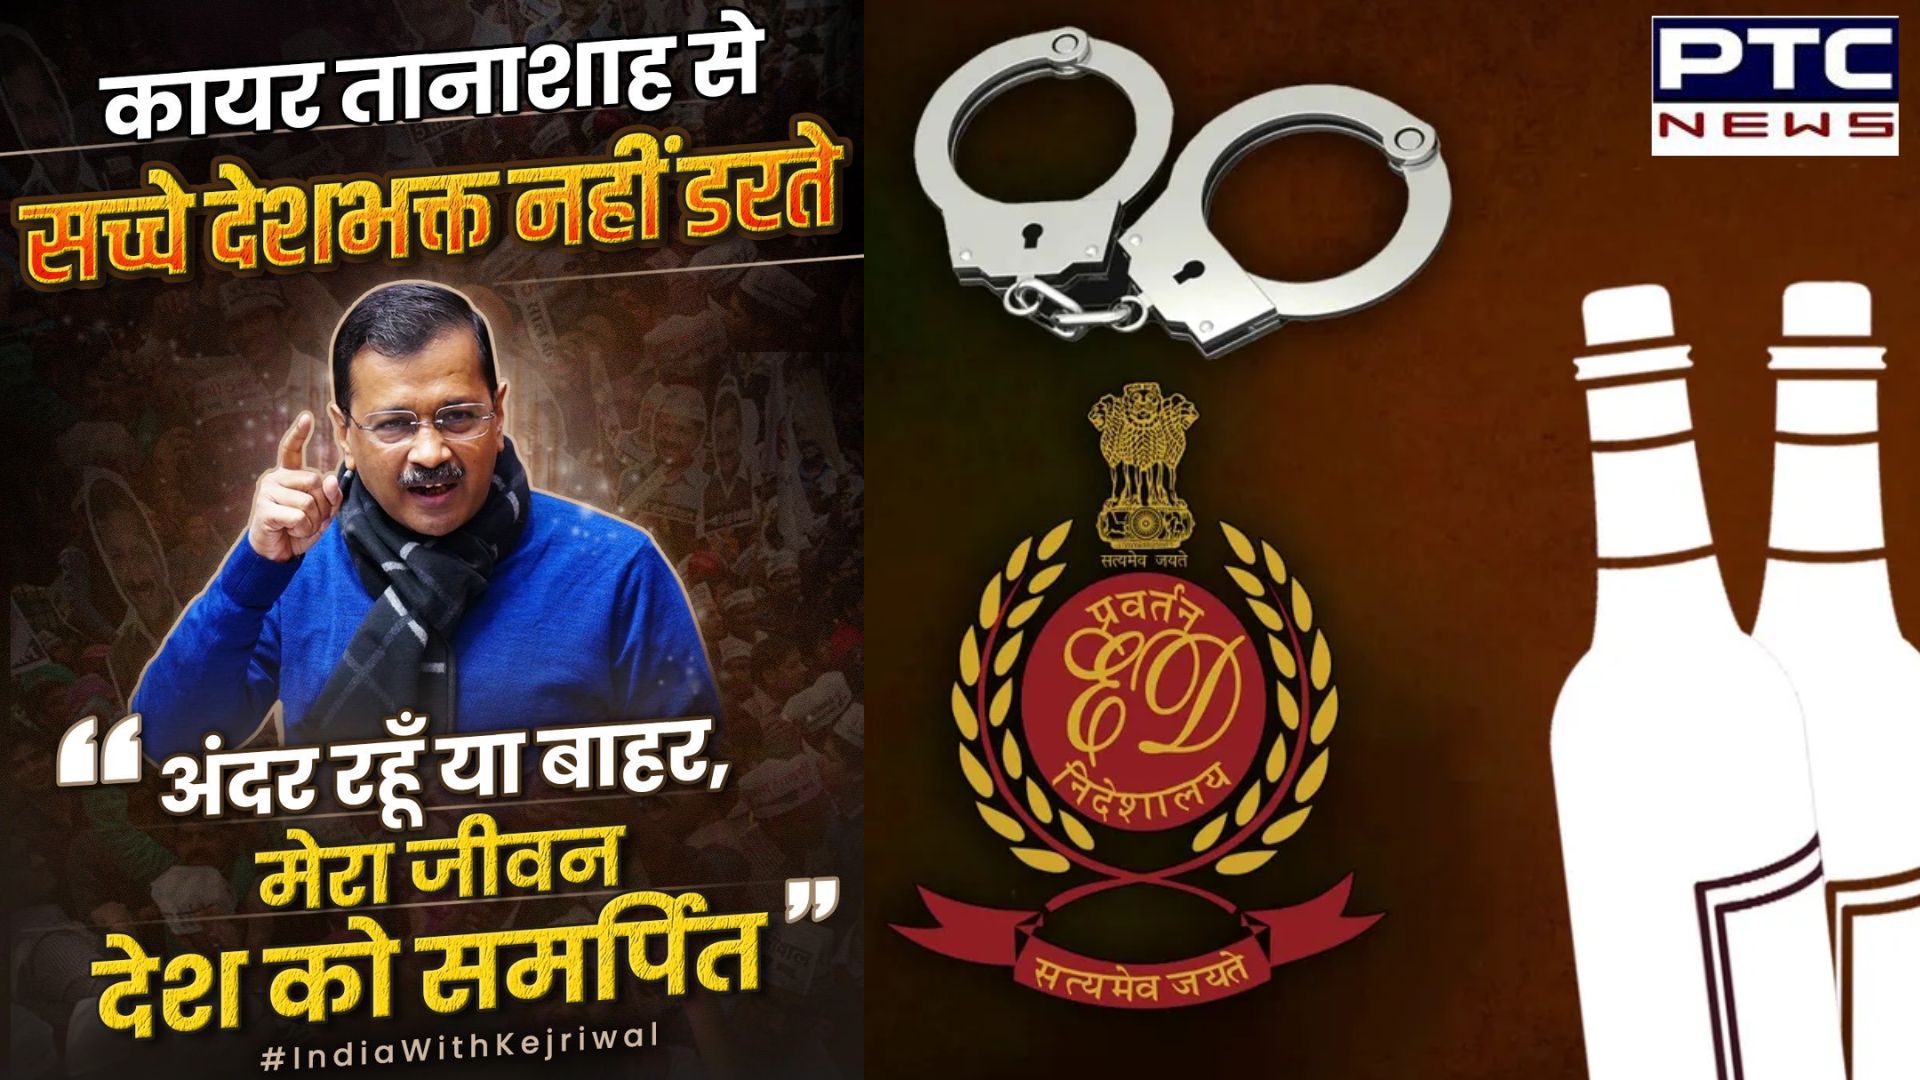 Delhi CM Kejriwal’s first reaction after arrest; says, 'My life dedicated to country'